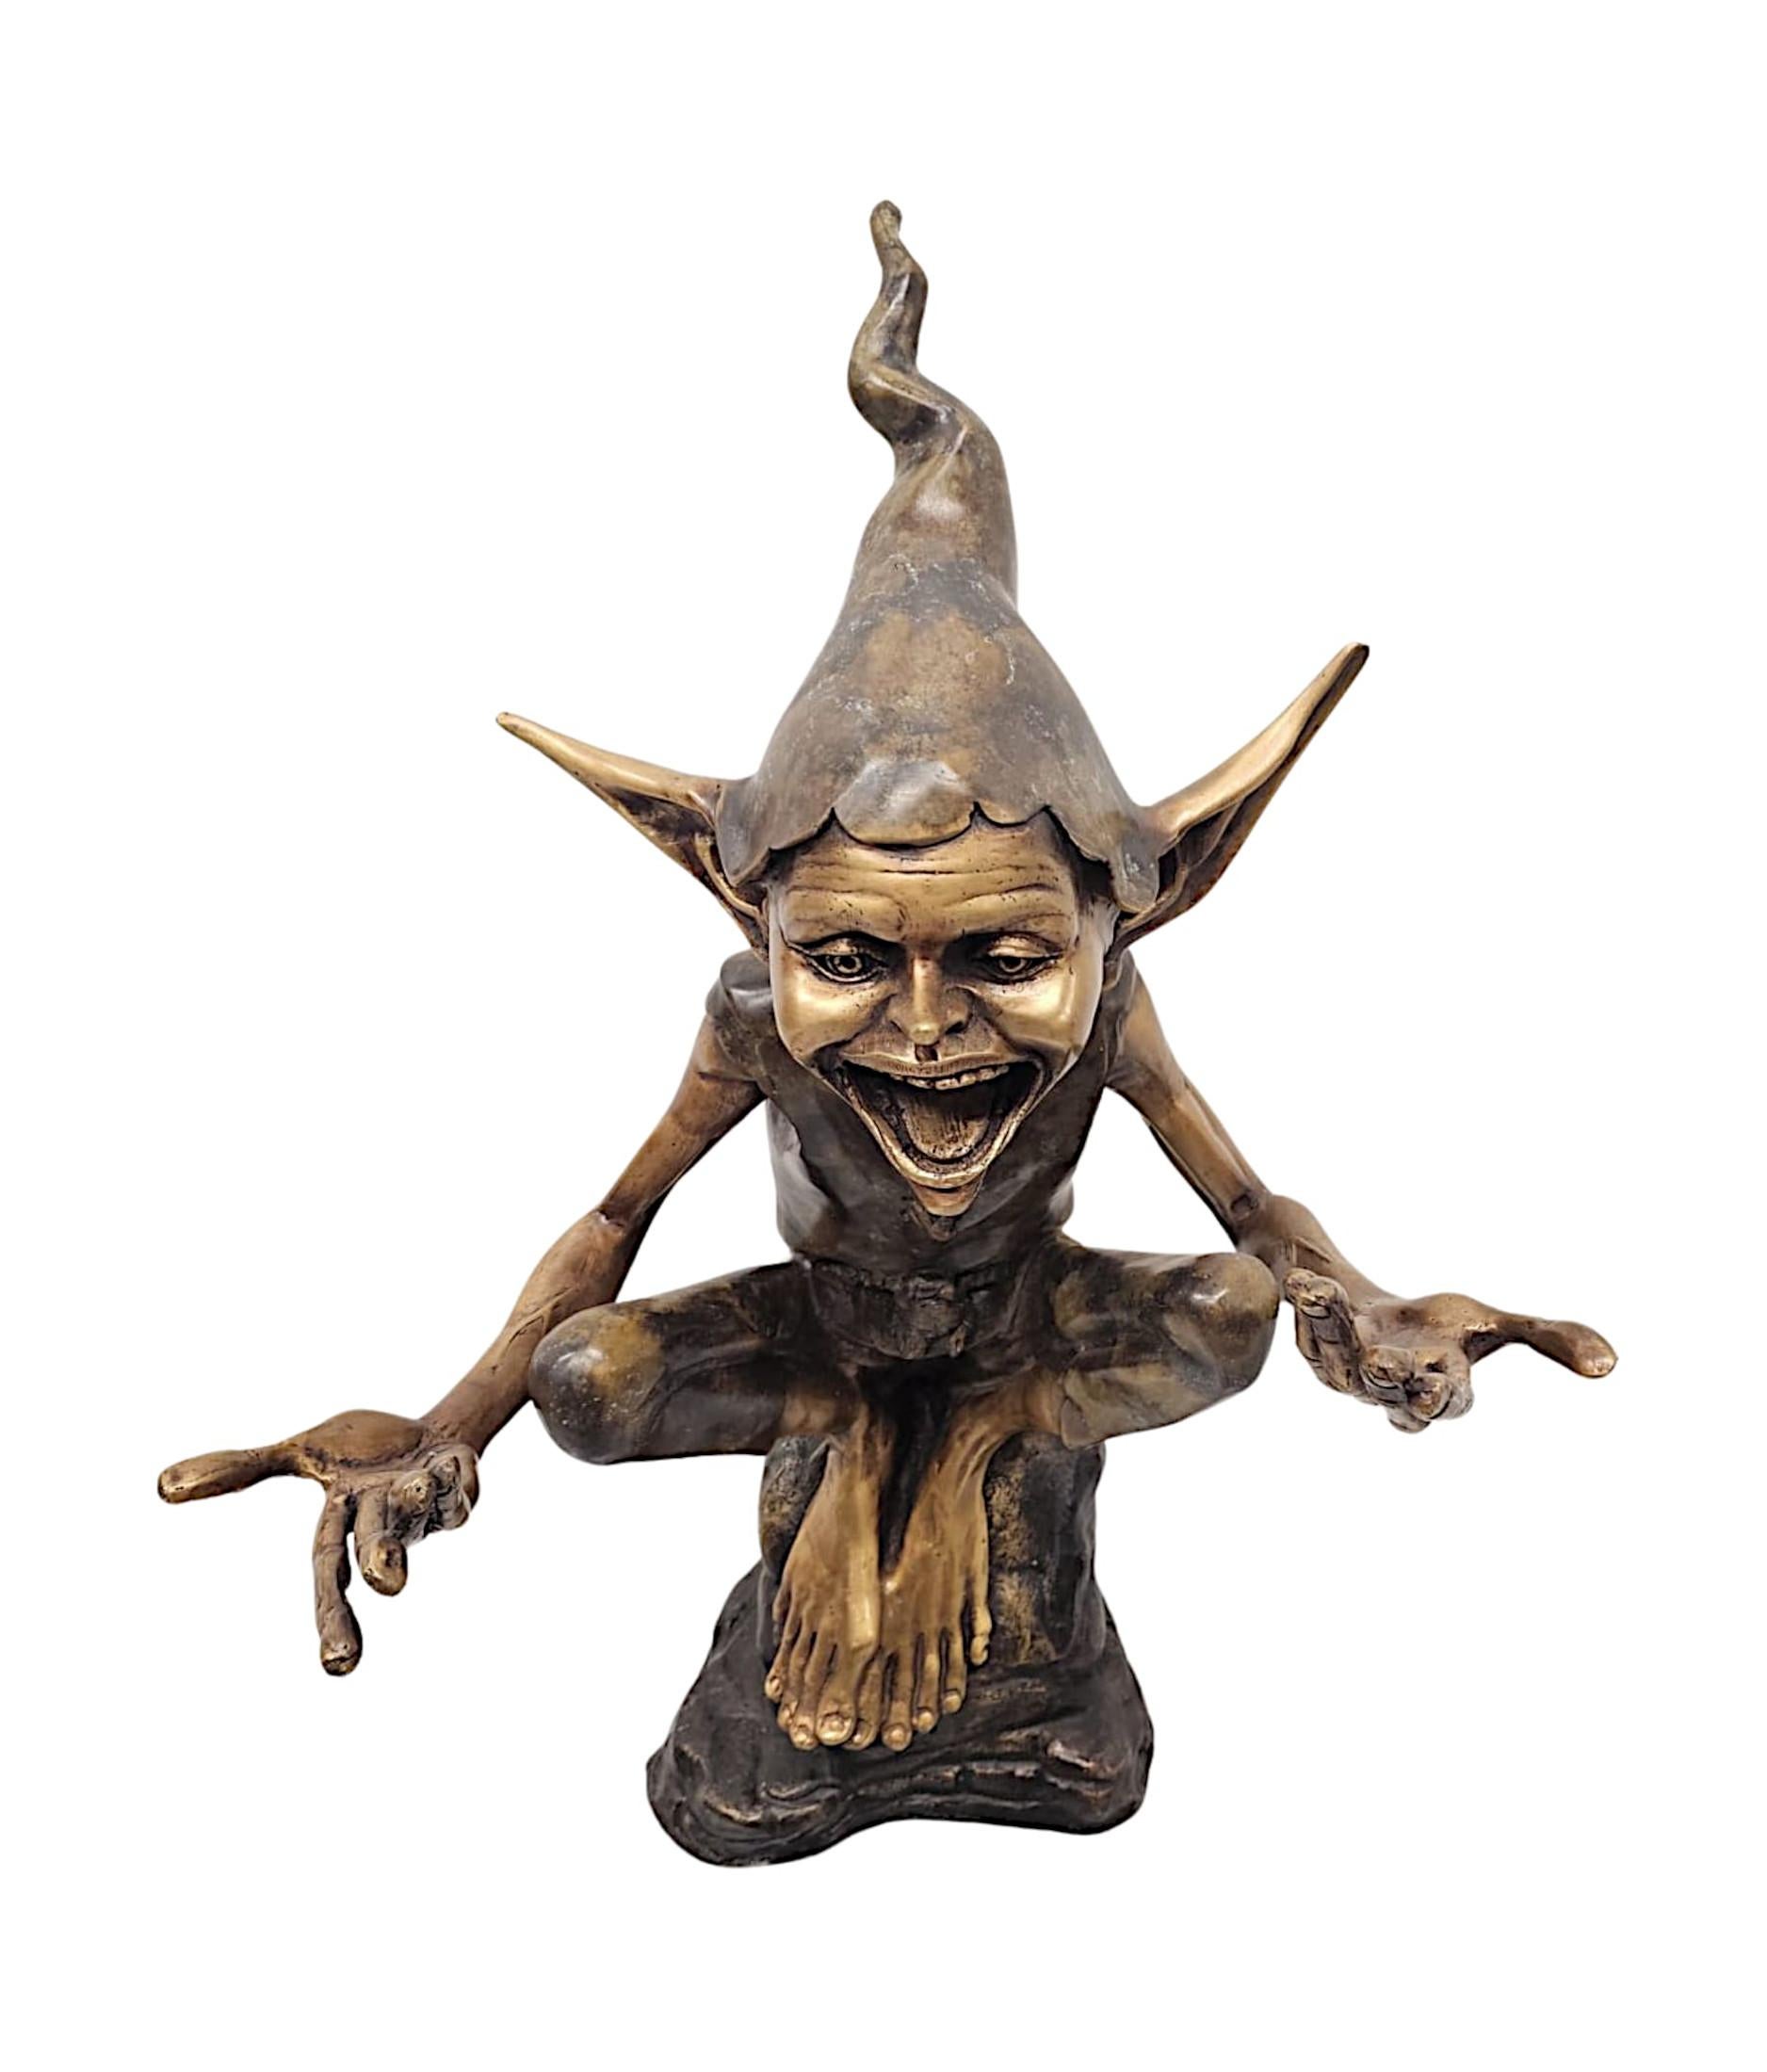 A fabulous 20th Century figurative bronze garden statue of a goblin perched atop a rock, of exceptional quality and finely cast with stunning detail and patination.